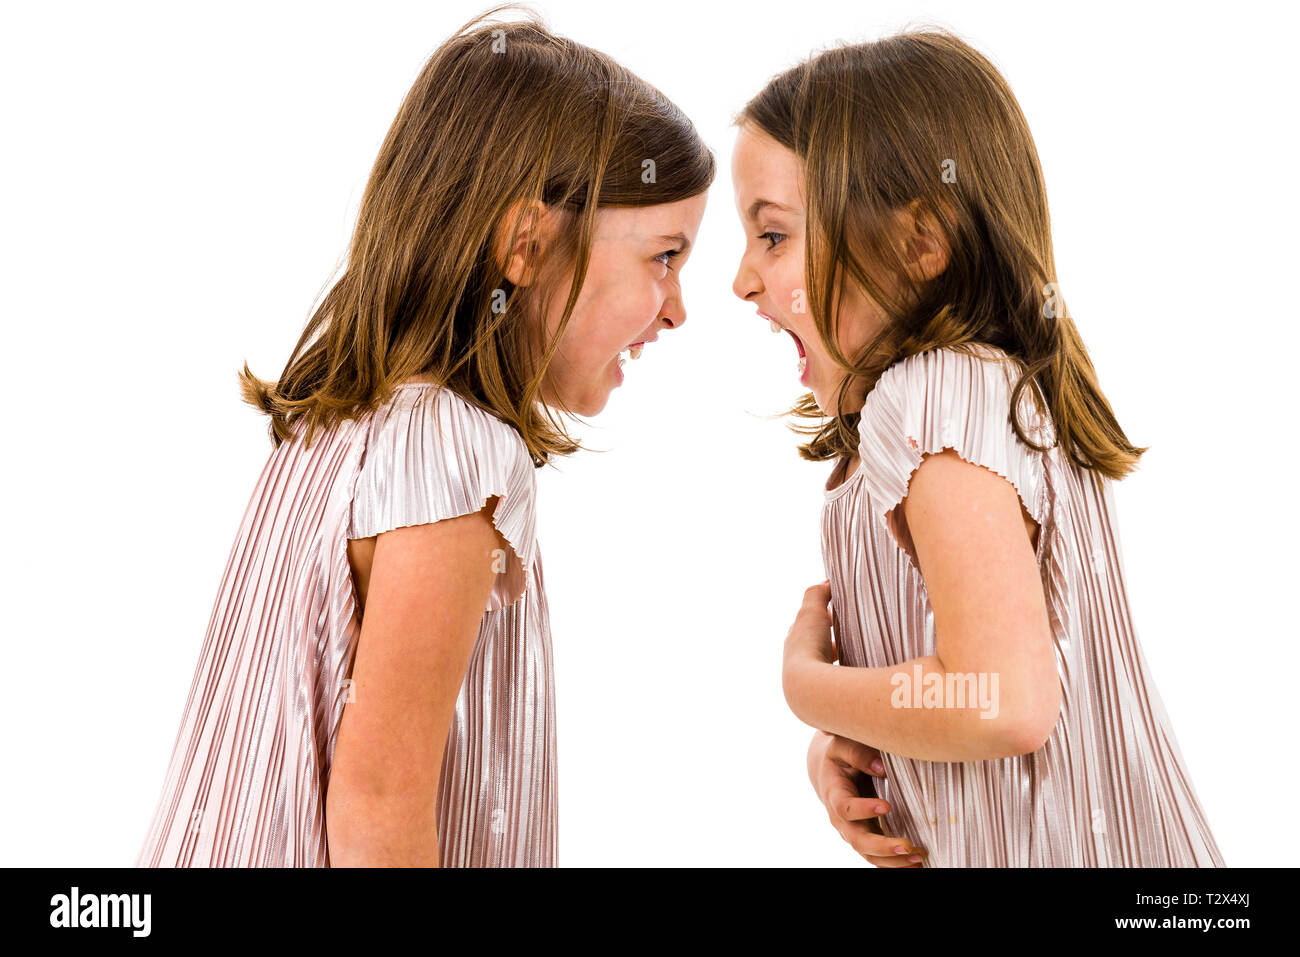 Identical twin girls sisters are arguing yelling at each other. Angry girls are shouting, yelling and arguing with emotional expression on faces. Fron Stock Photo